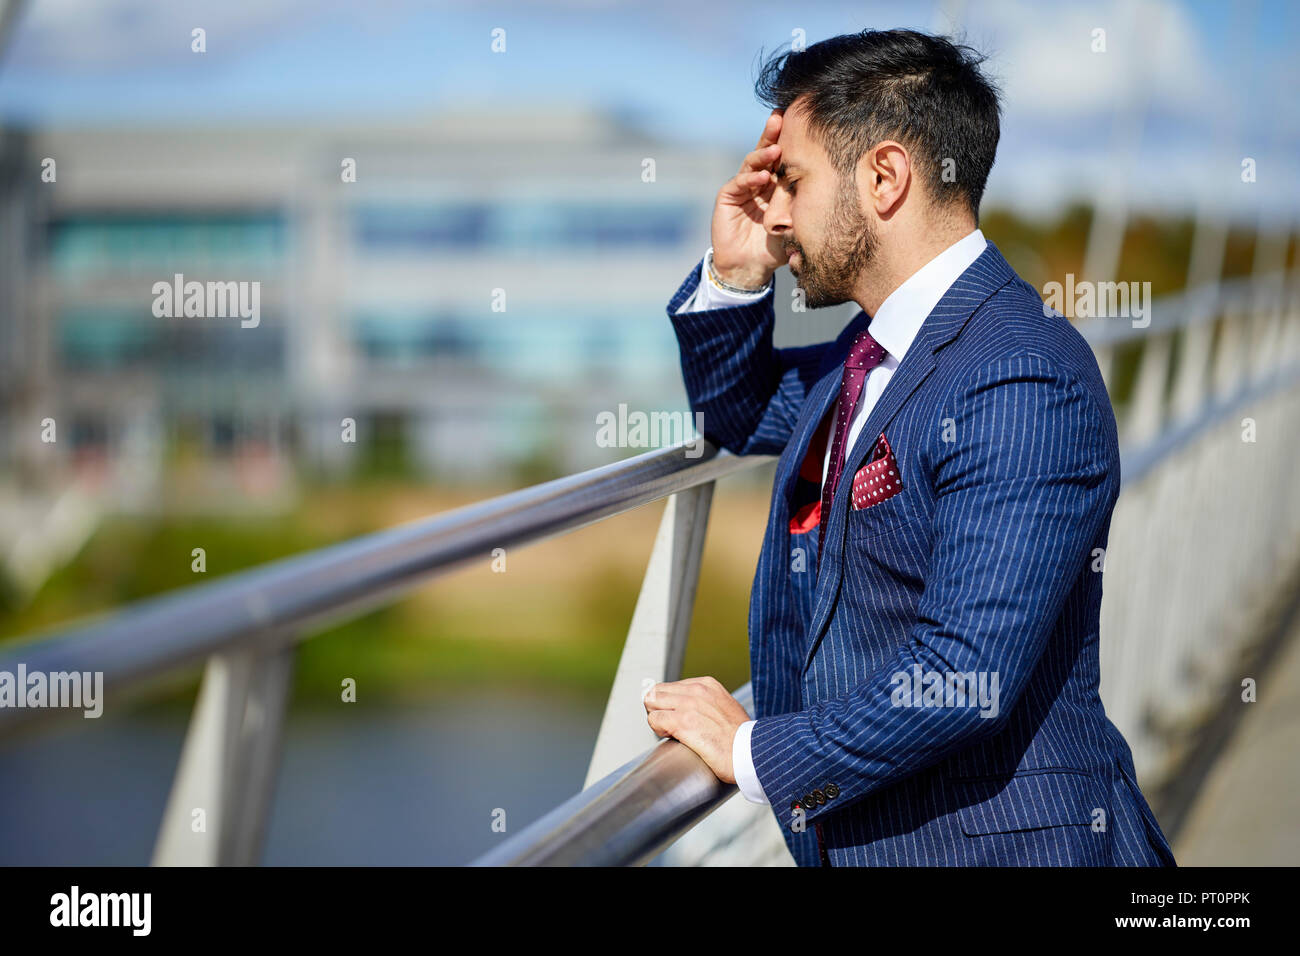 Stressed out businessman Stock Photo